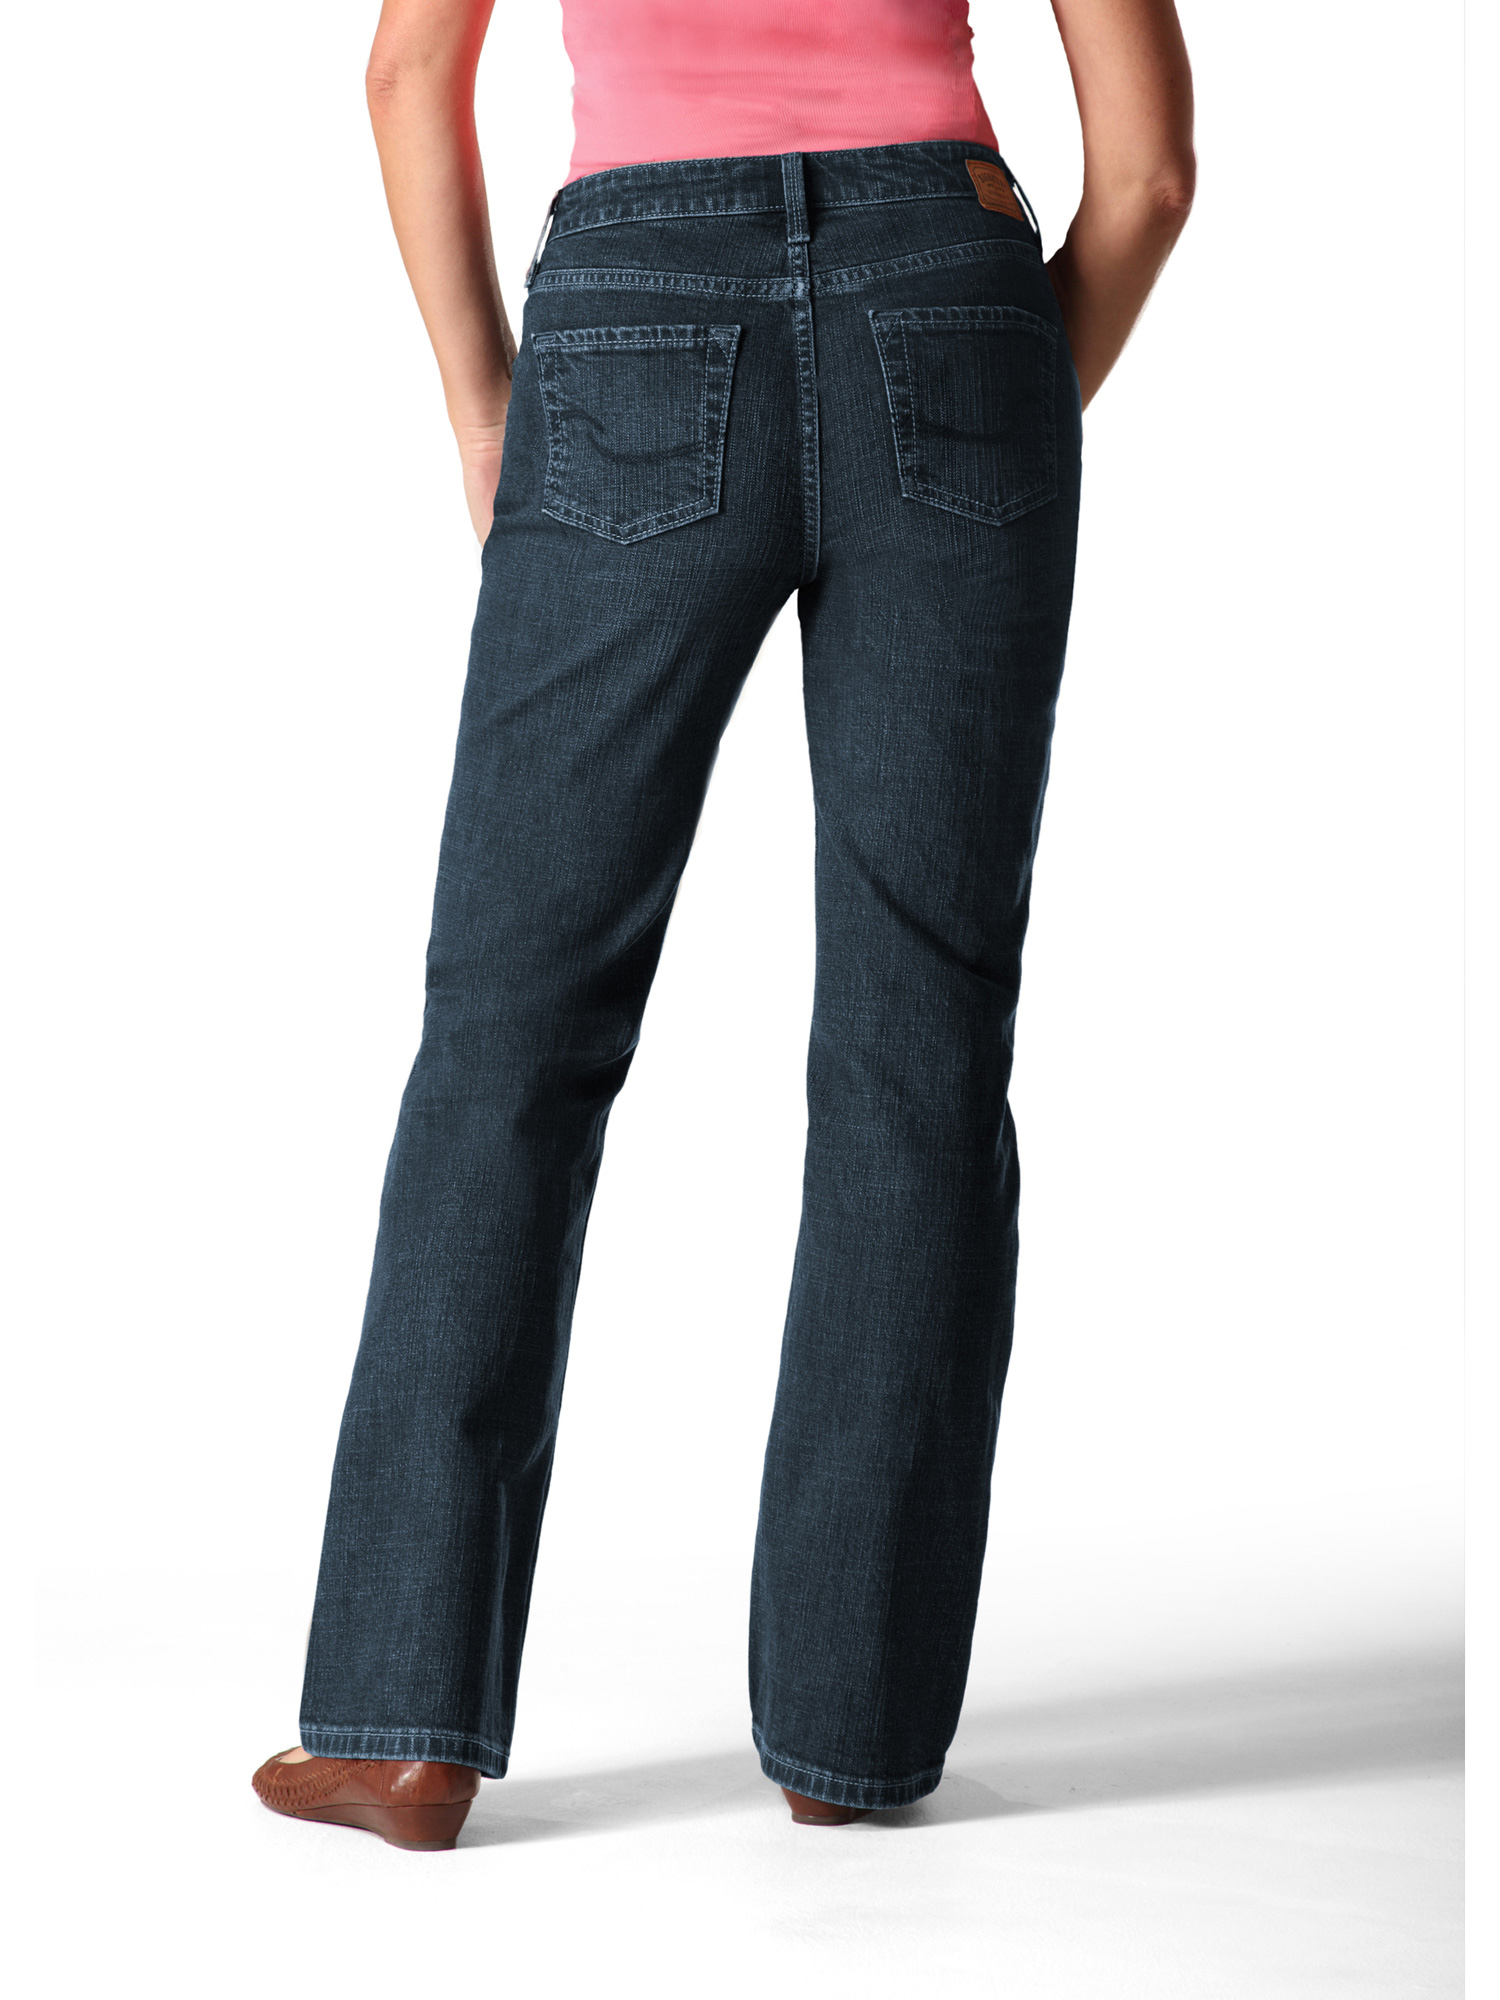 Signature by Levi Strauss & Co. Women's Totally Slimming At Waist Bootcut Jeans - image 3 of 4